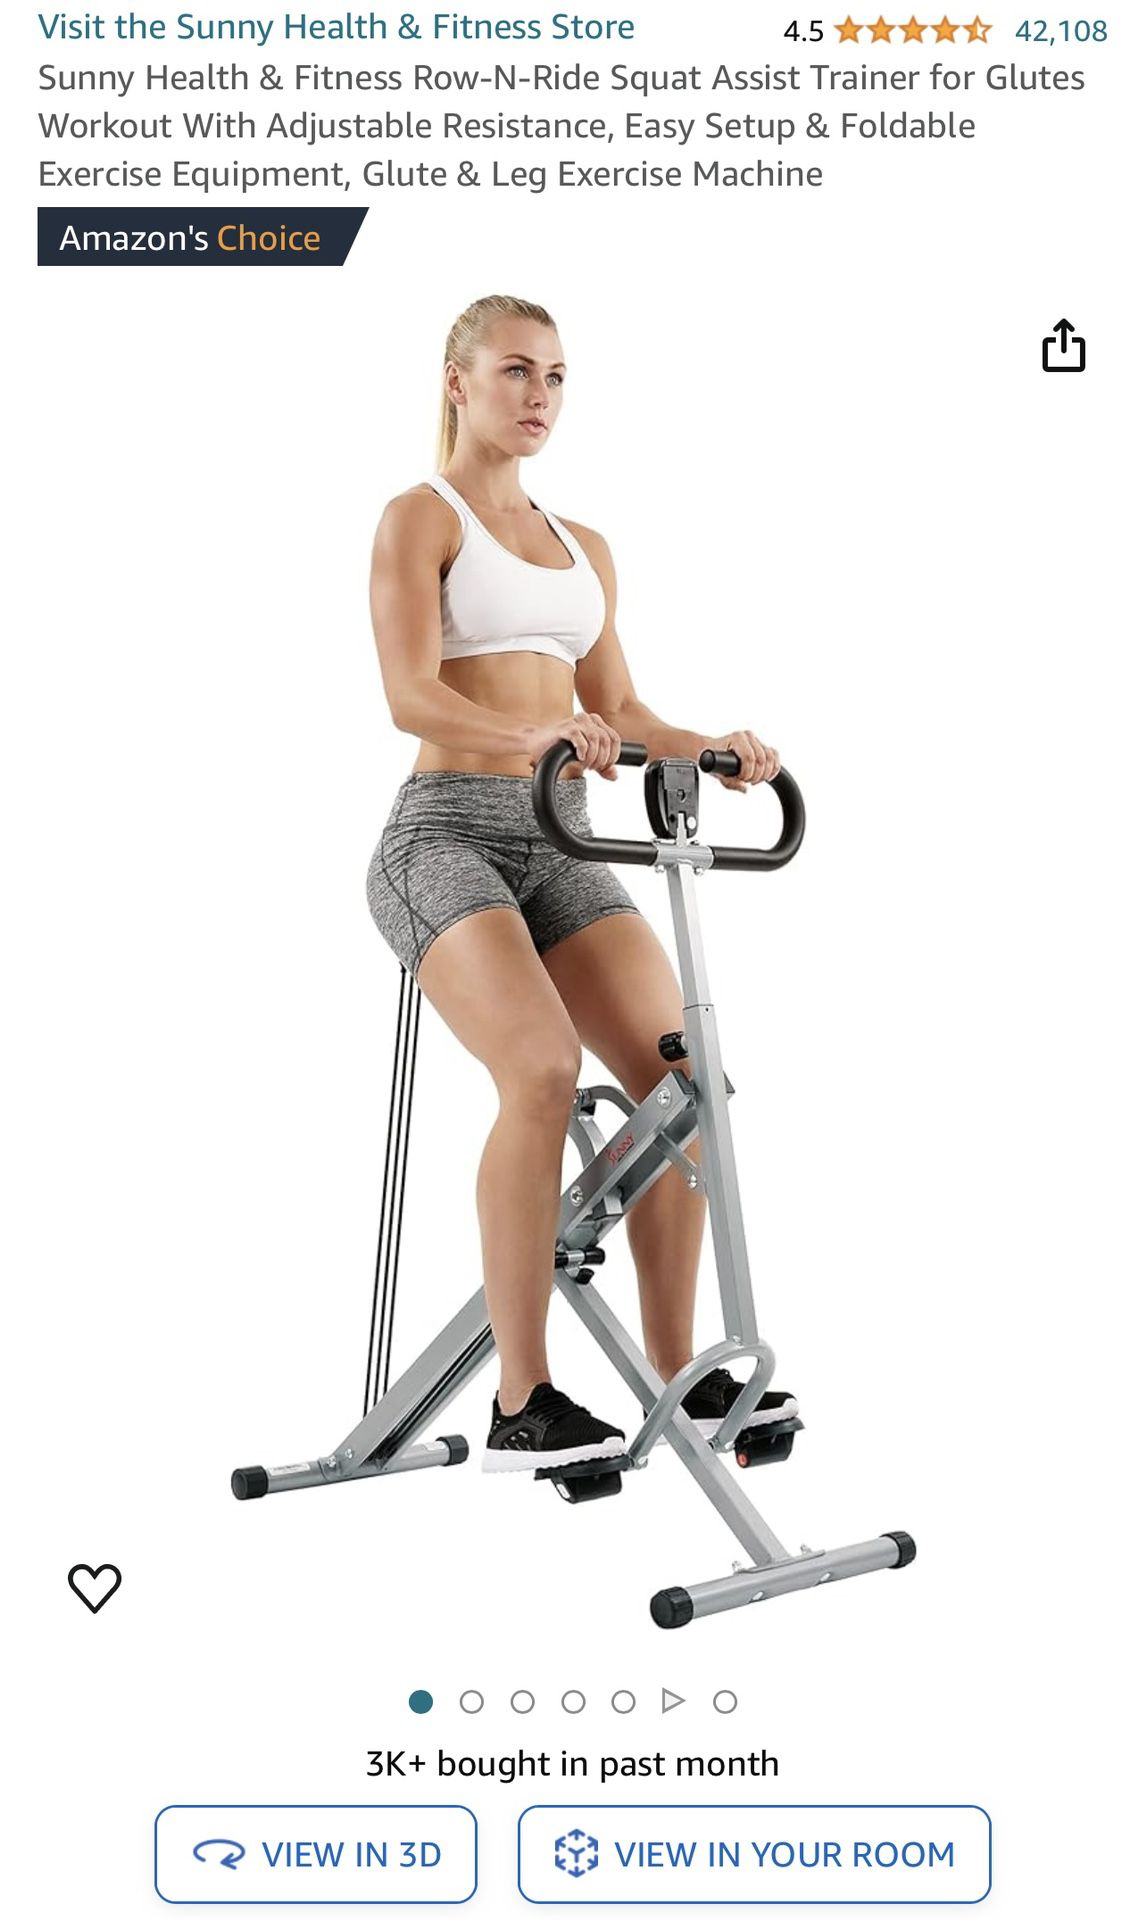 Sunny Health & Fitness Row-N-Ride Squat Assist Trainer for Glutes Workout 